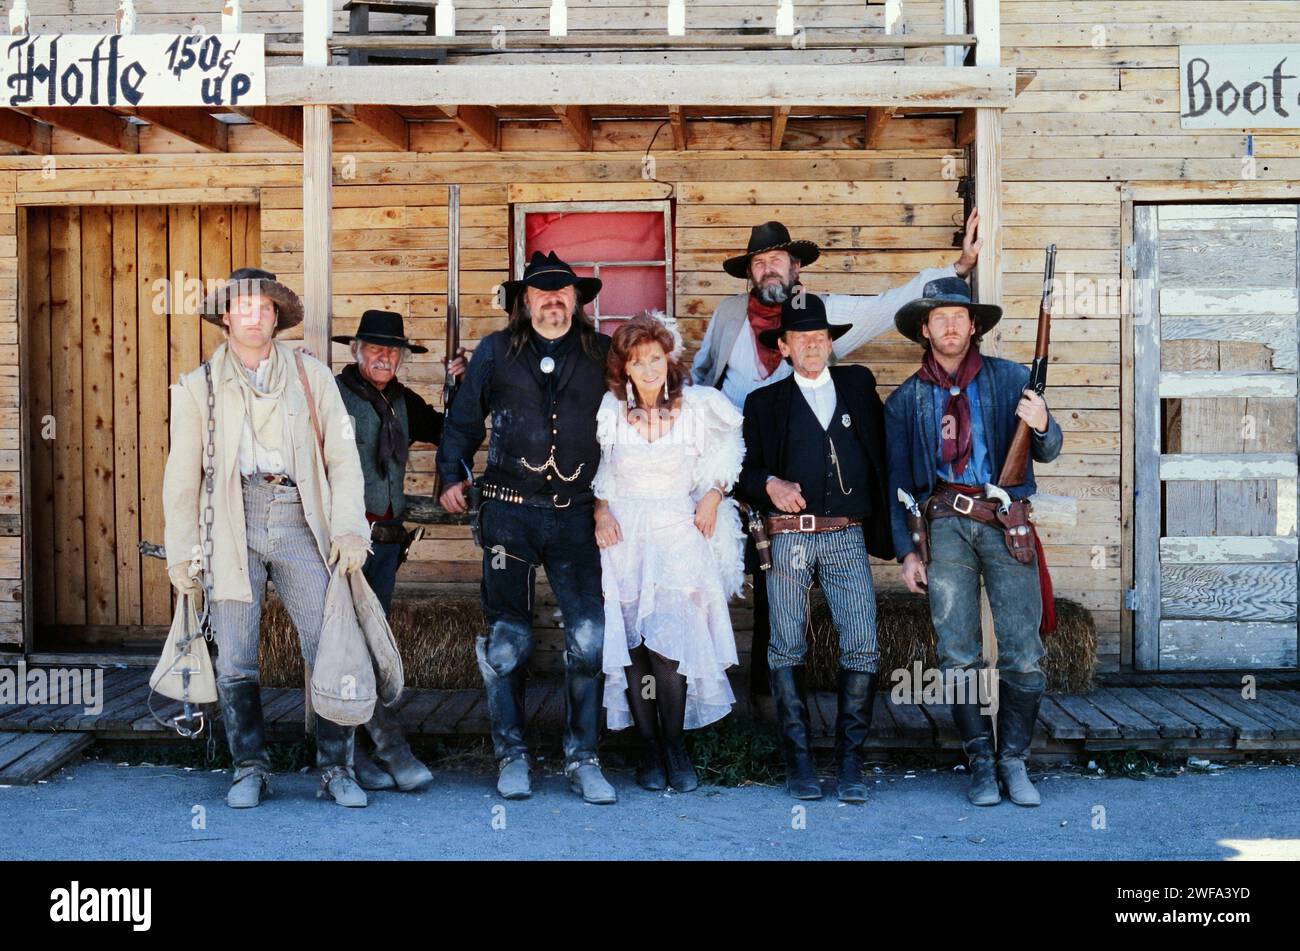 A group of seven people stands in a line, posing in period-specific costumes representative of the American Wild West era, in front of a rustic saloon Stock Photo